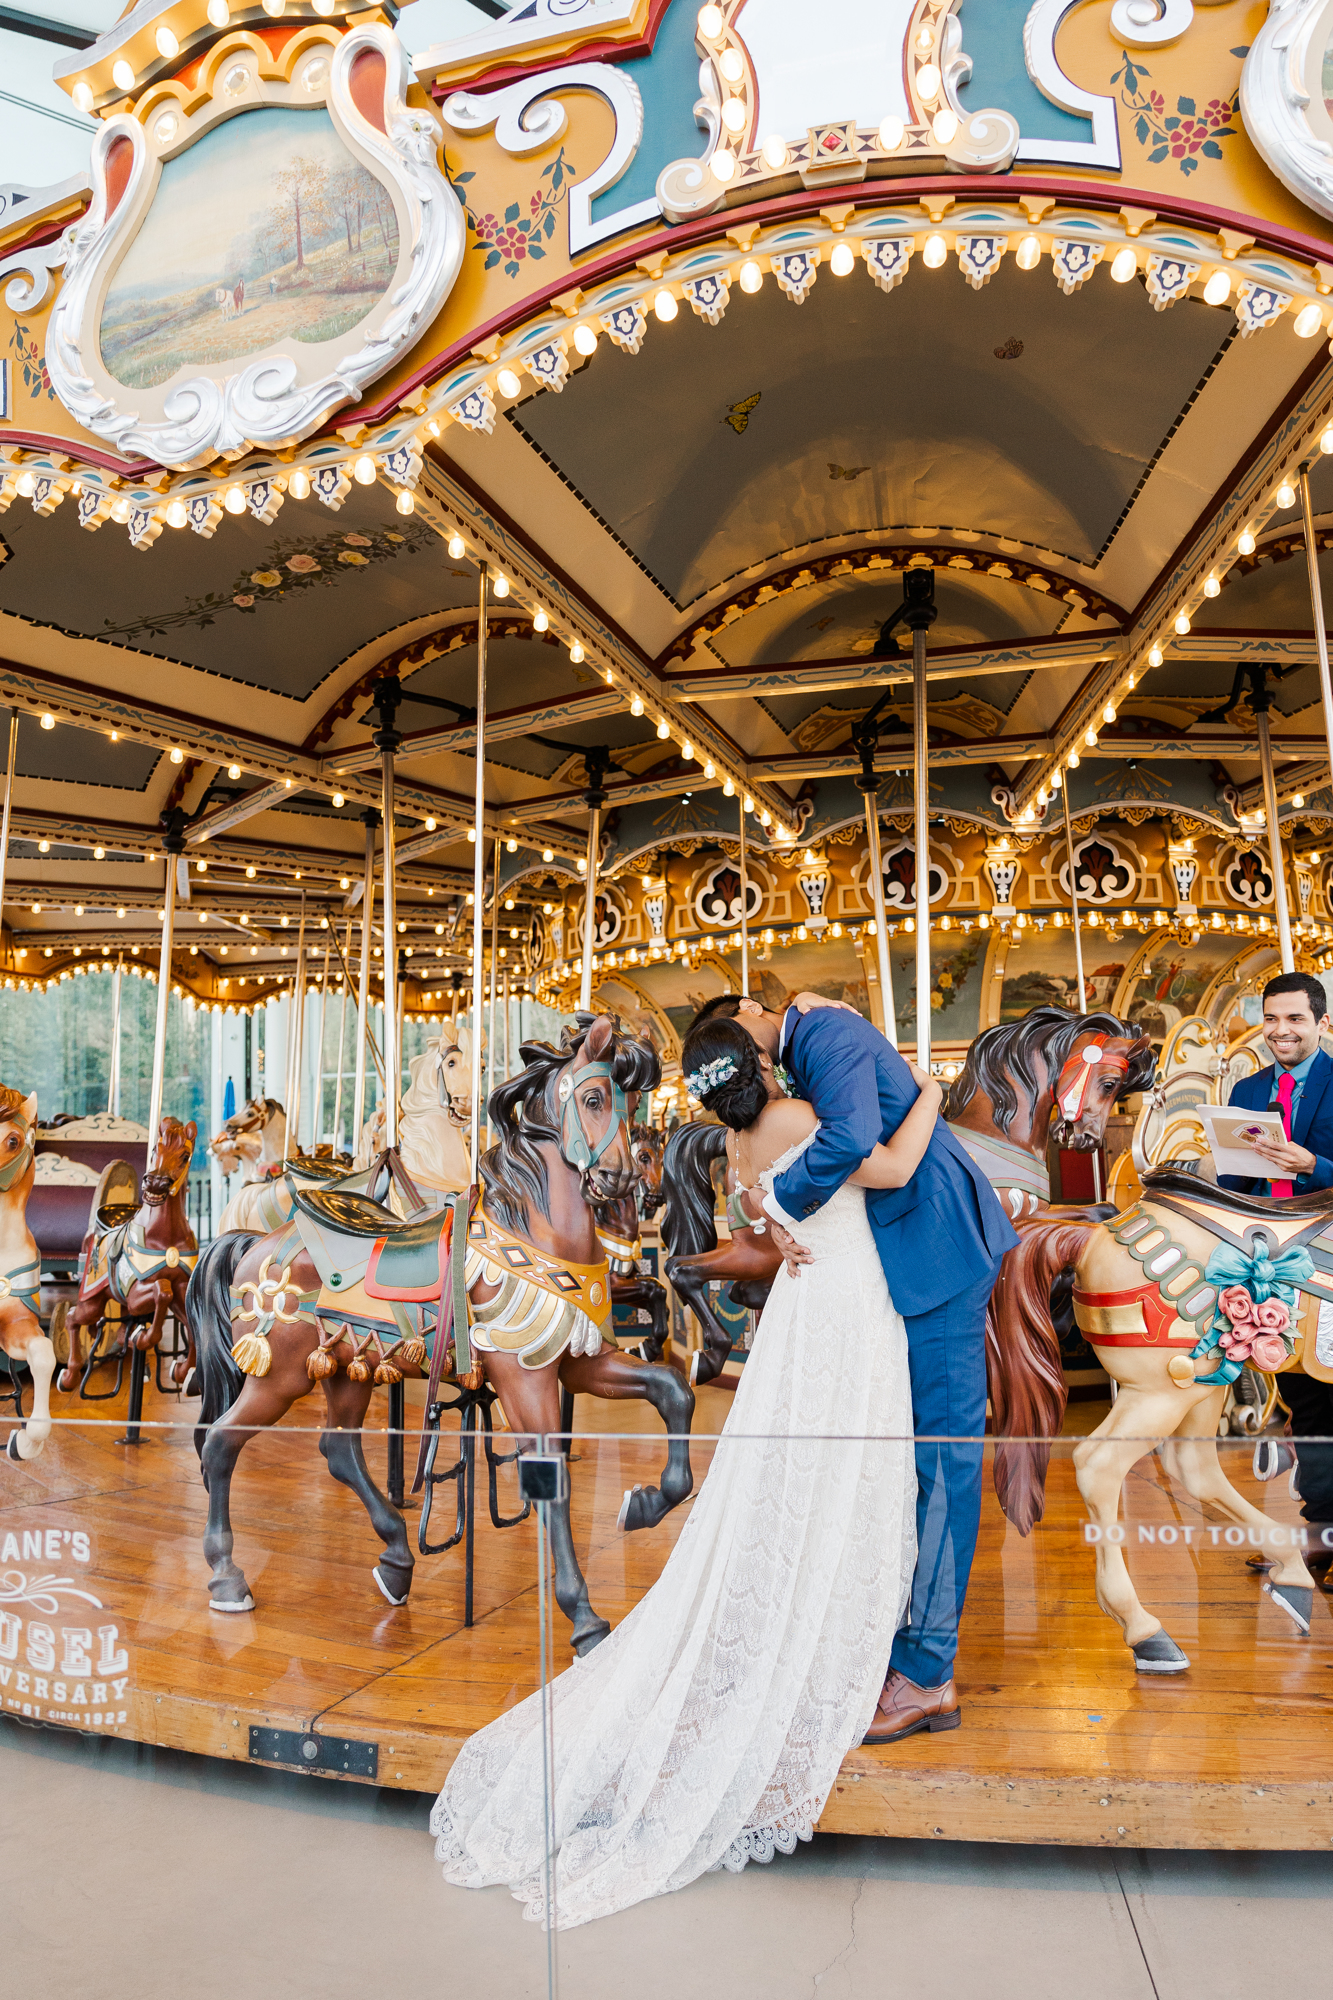 Flawless Jane's Carousel Elopement at Sunset